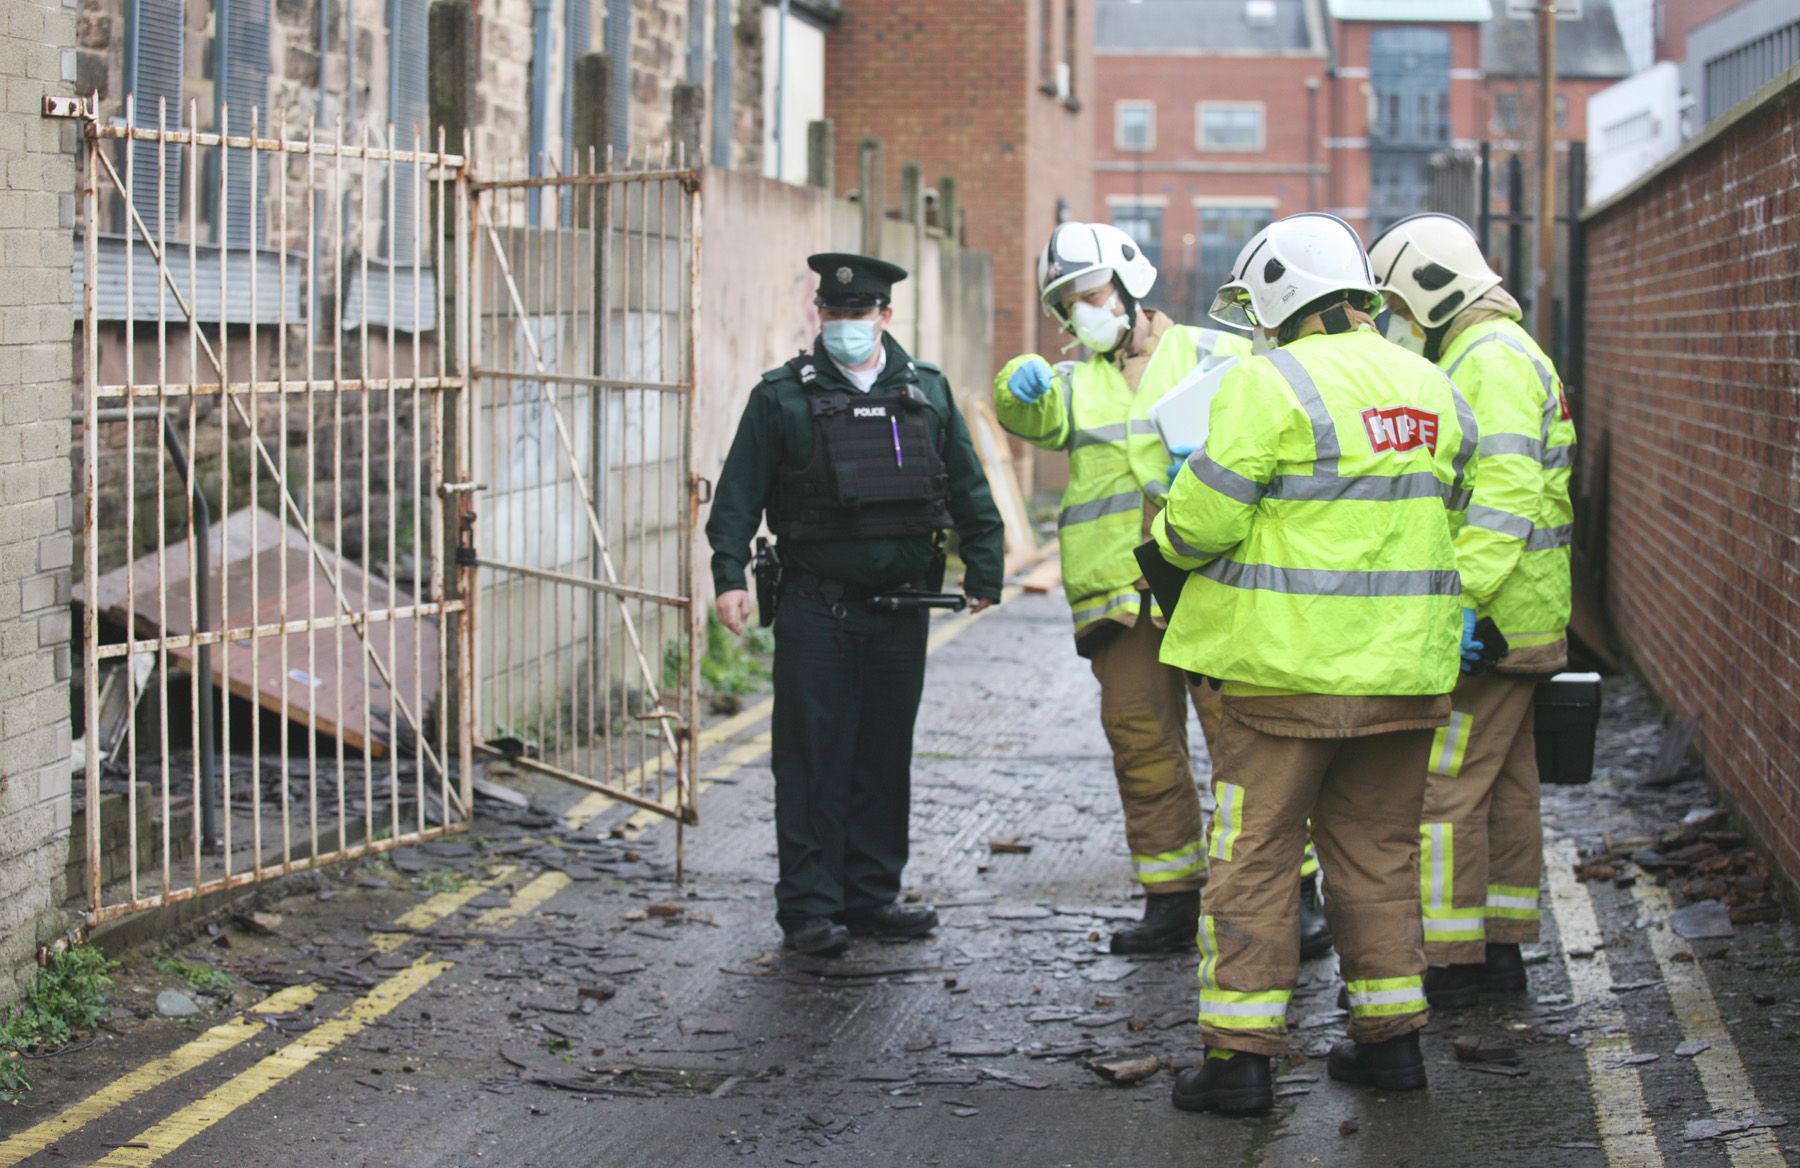 HATE CRIME PROBE: Police officers and firefighters at the scene of the attack on Friday morning